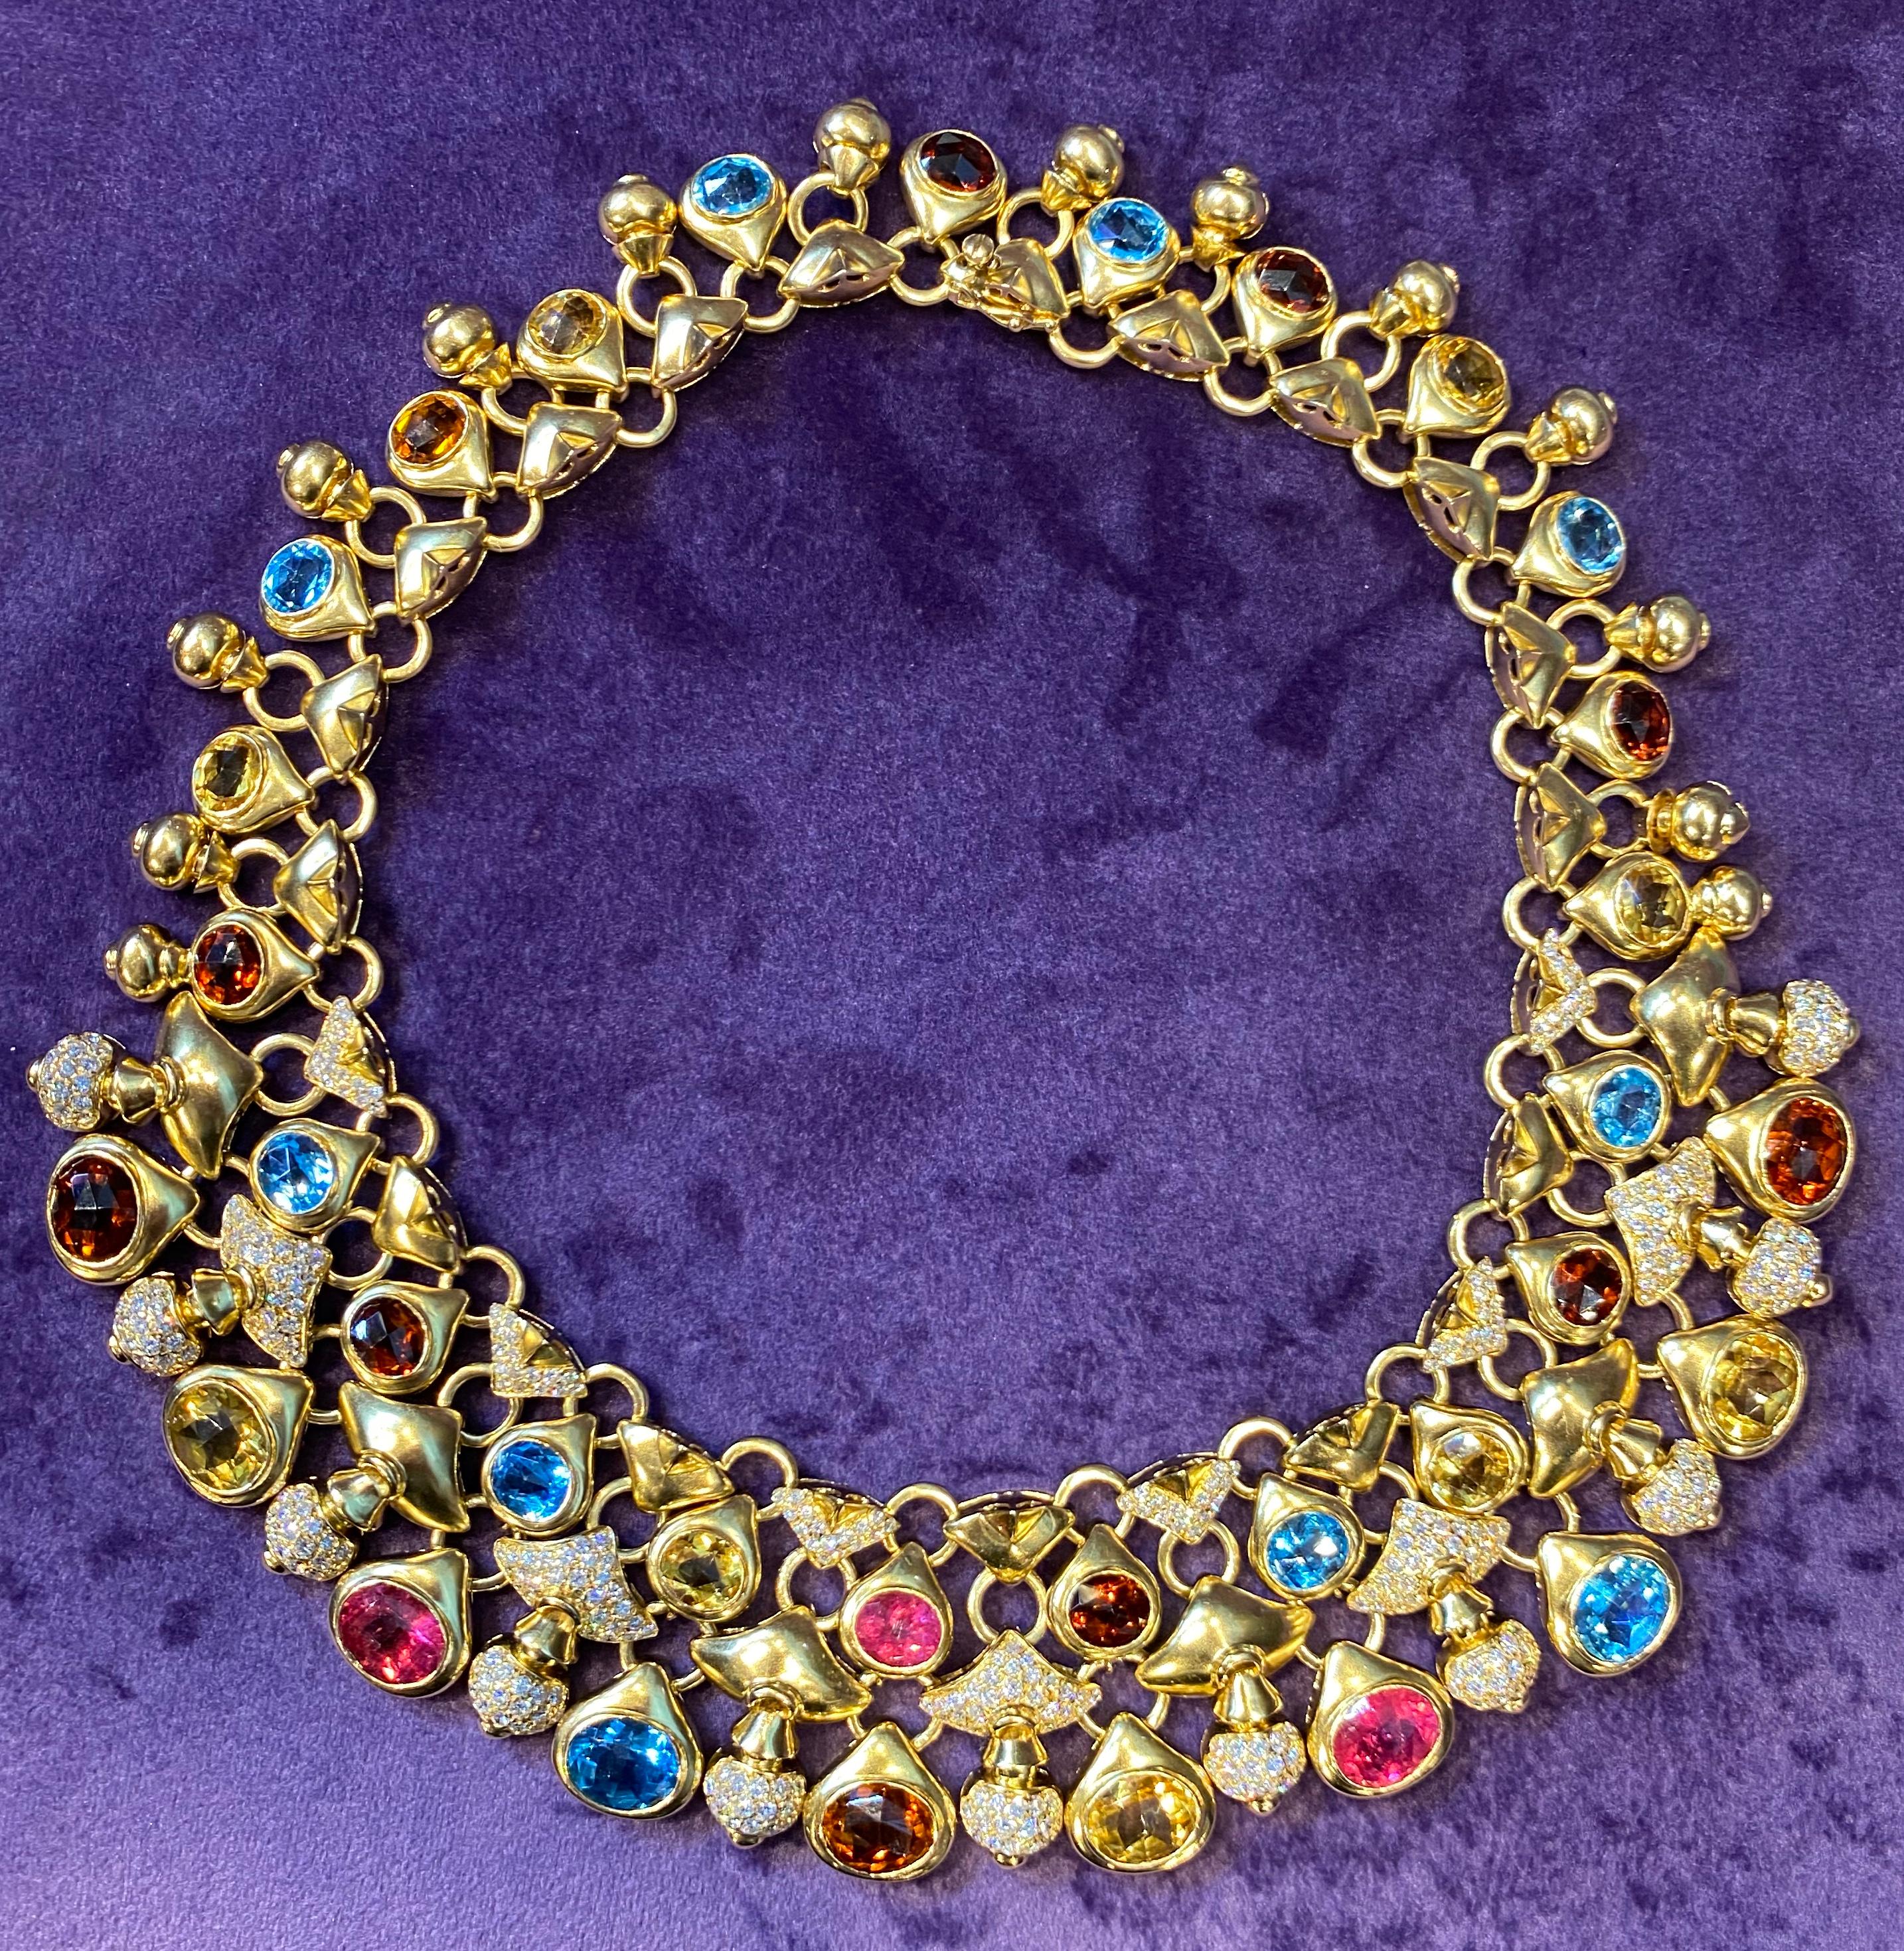 Round Cut Impressive Multi Gem and Diamond Gold Necklace by Moussaieff